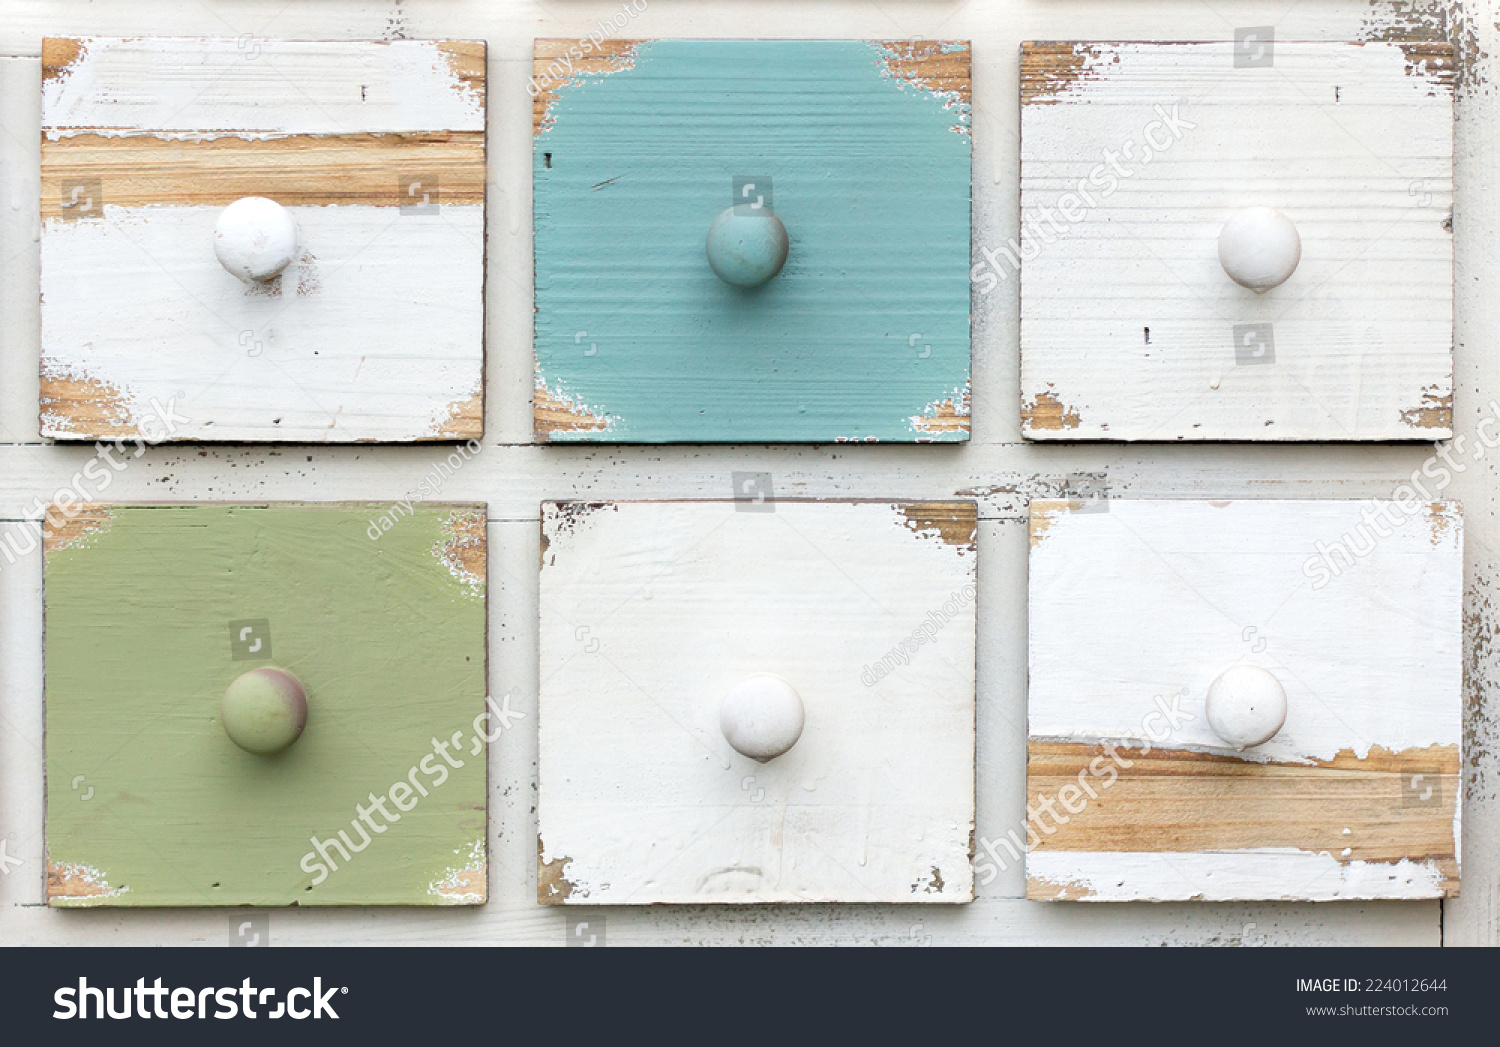  Wooden crates-style colored "shabby chic" #224012644